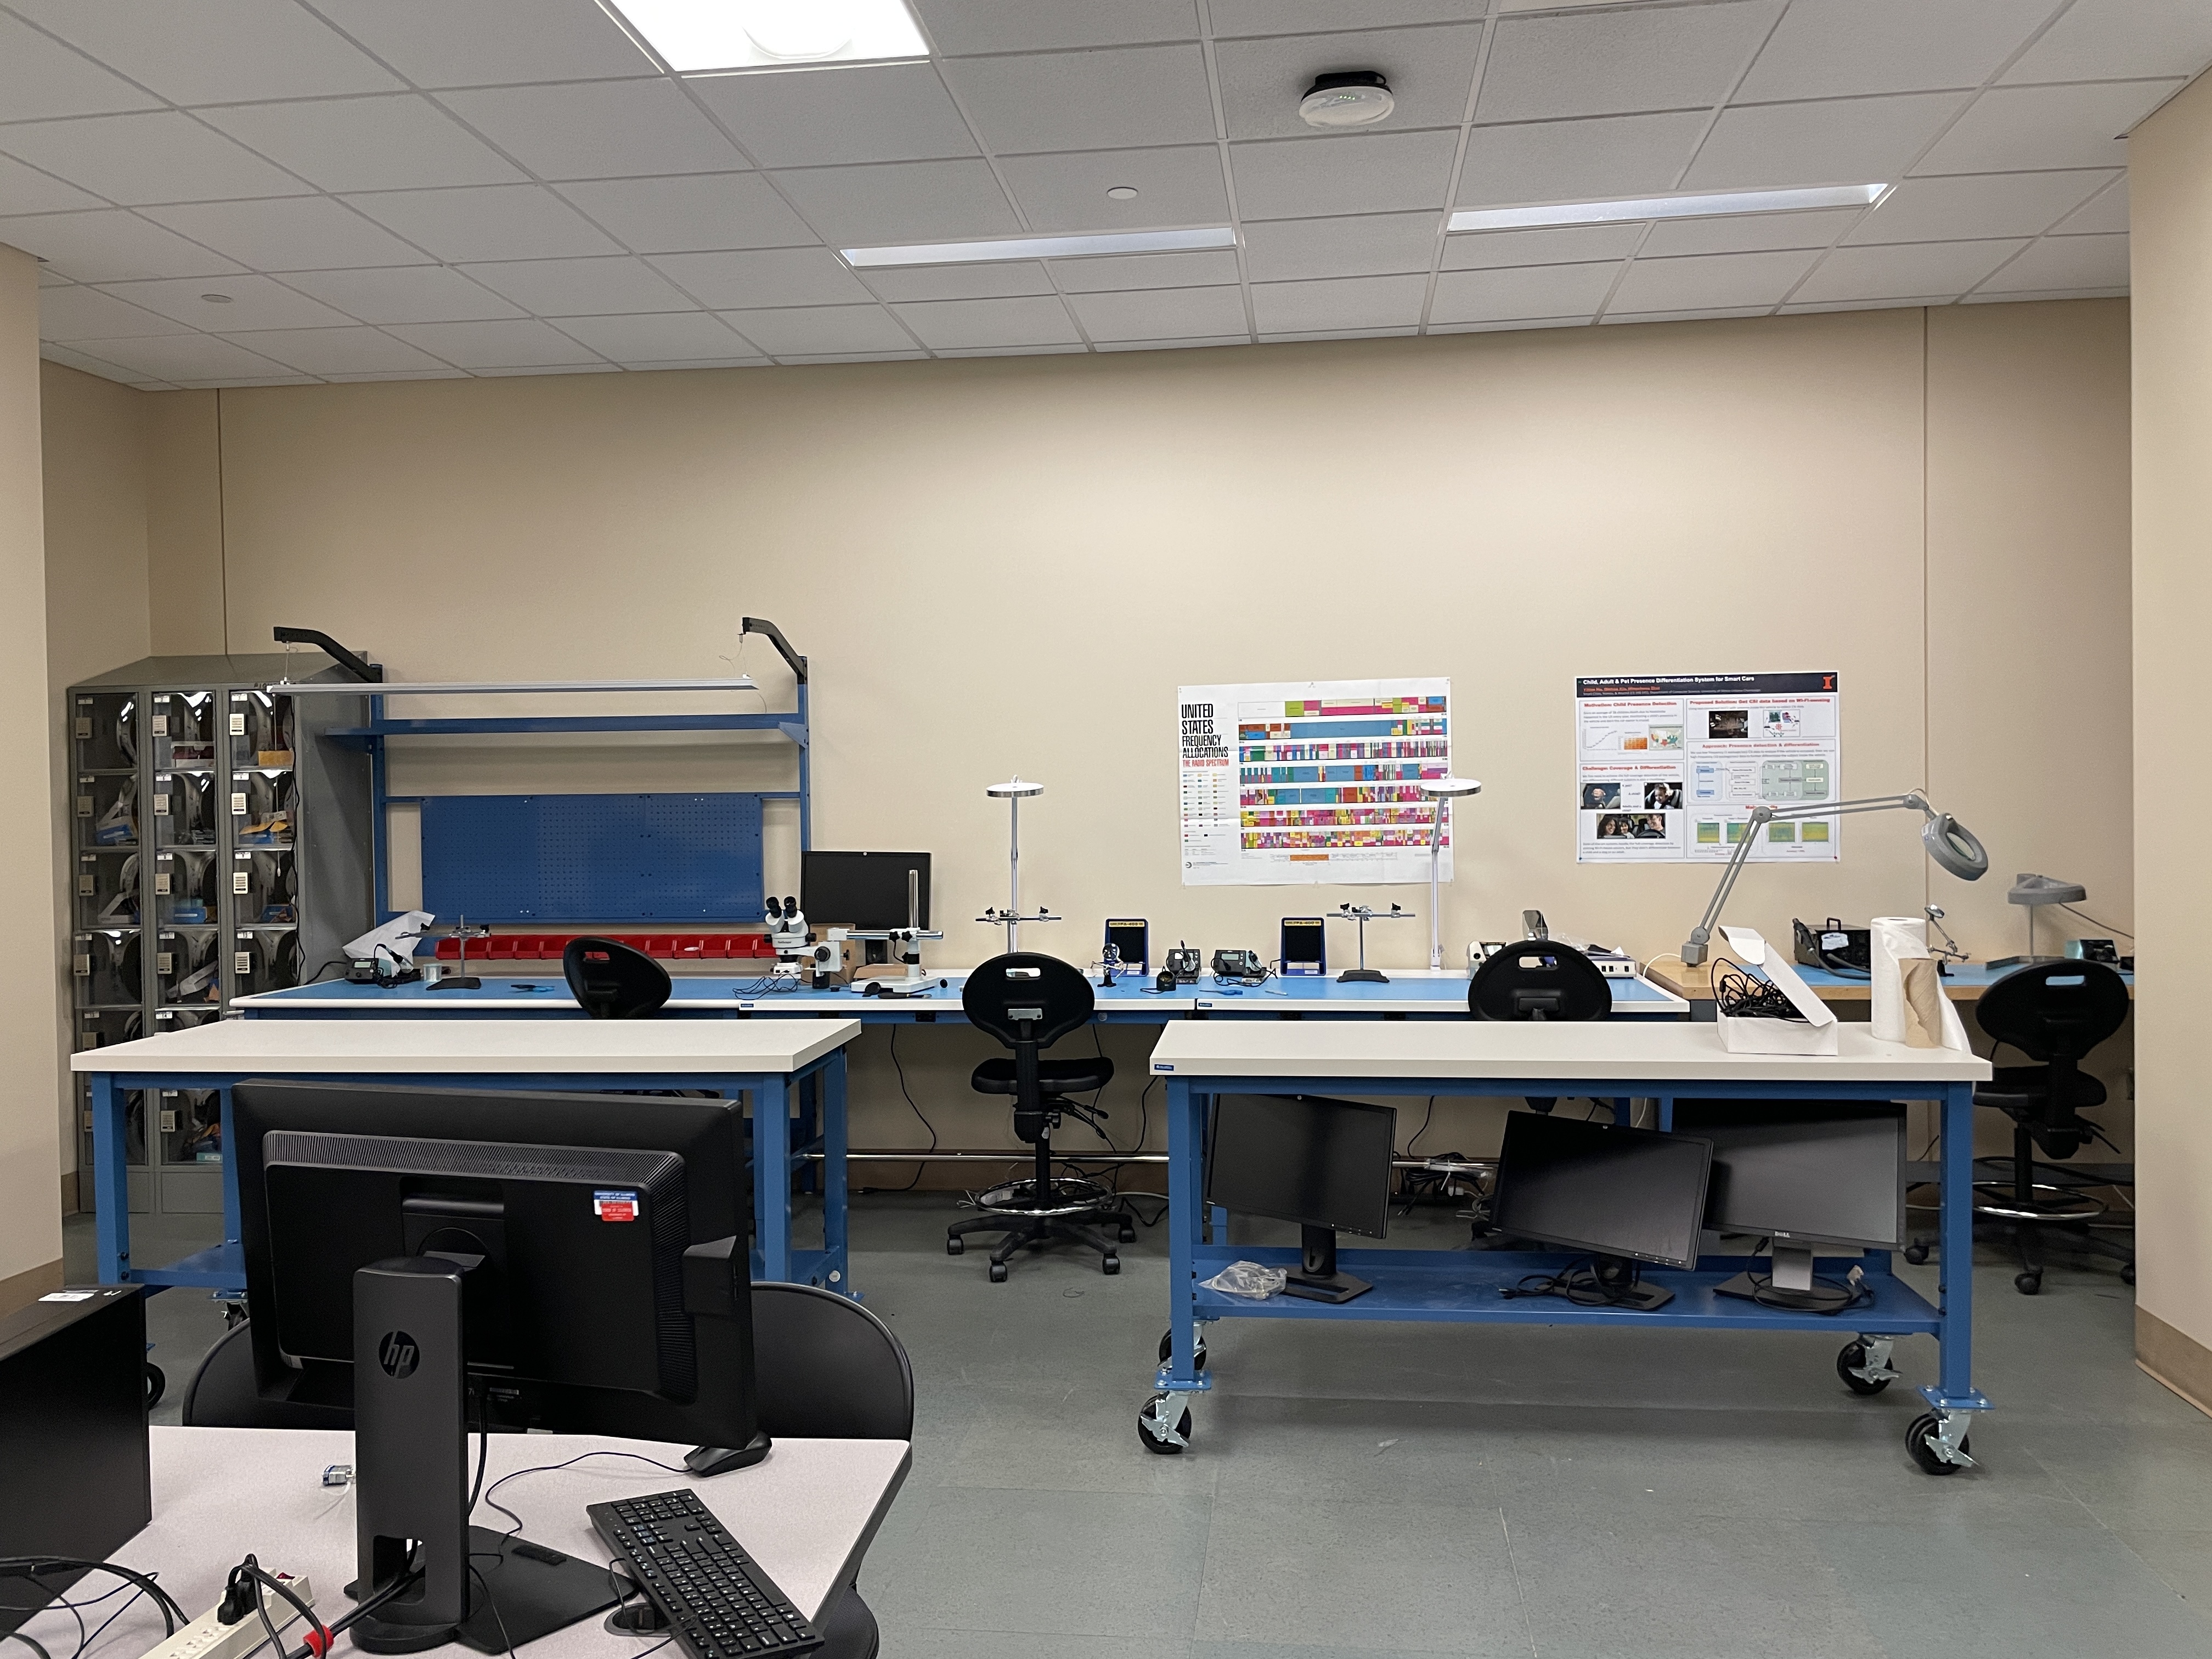 Makerspace Workbench